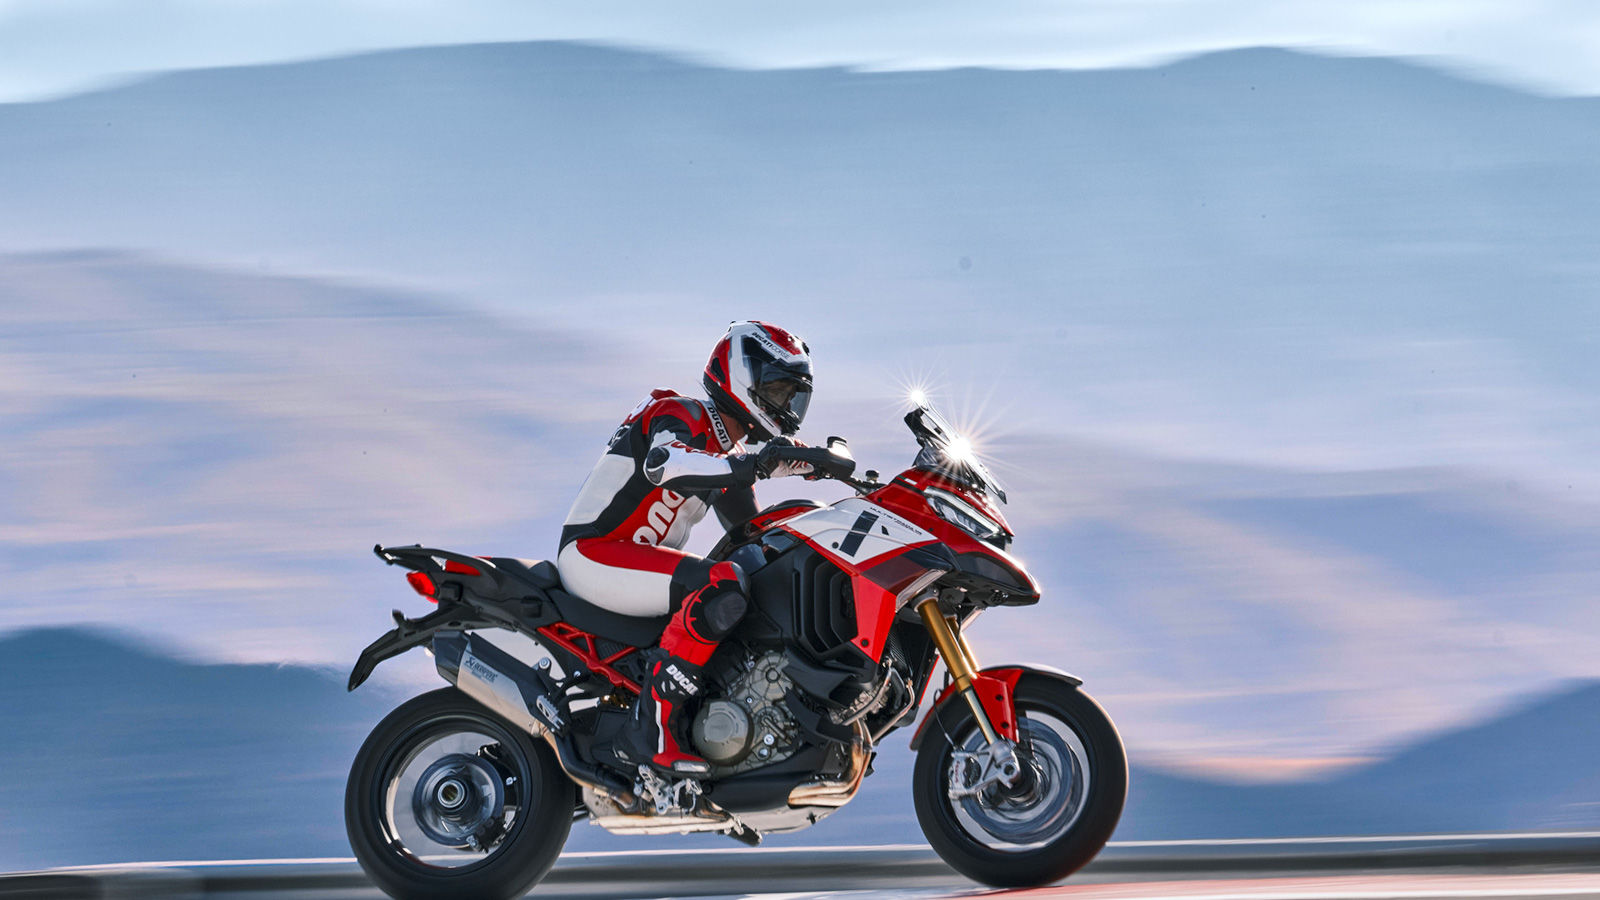 A look at the impressive and brand-new 2023 Ducati Multistrada